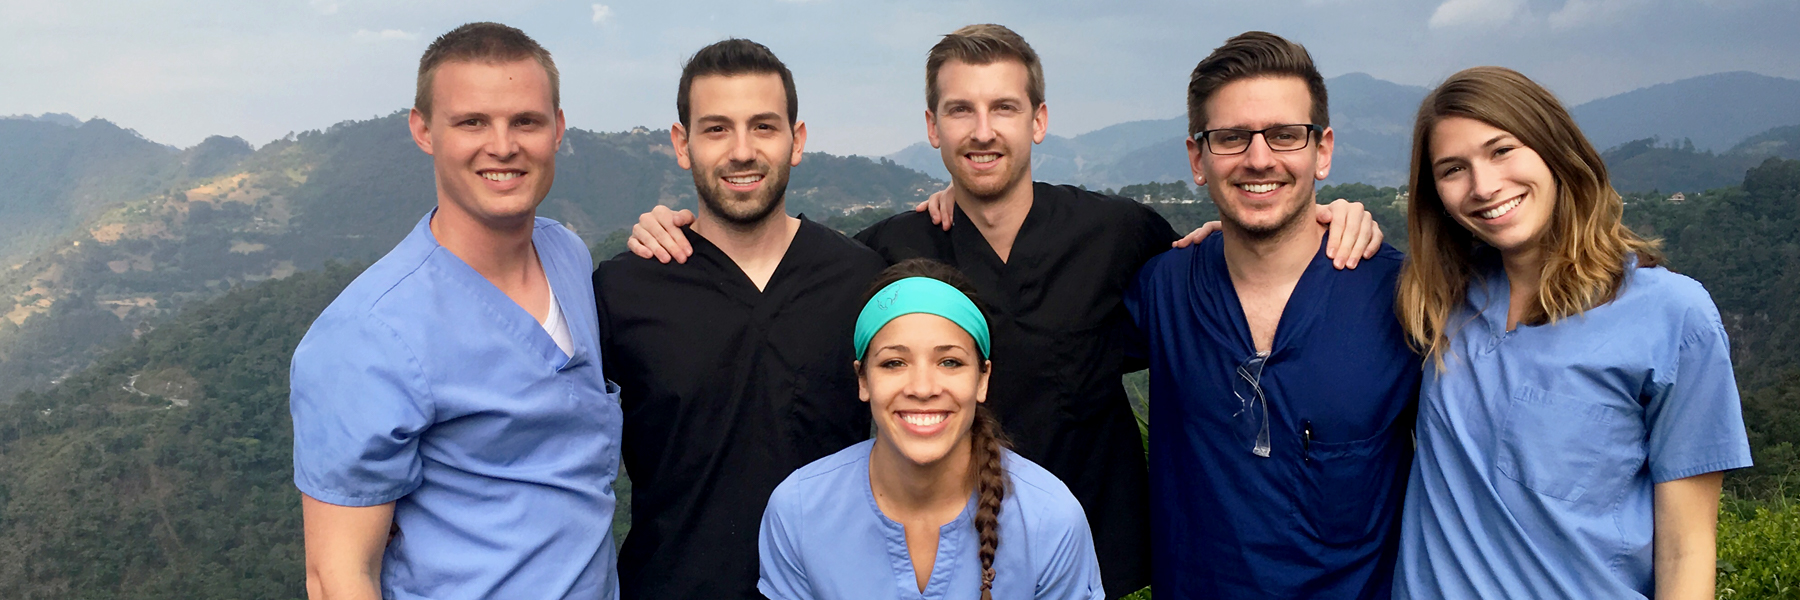 A group of students in their scrubs pose in front of a green, hilly landscape.